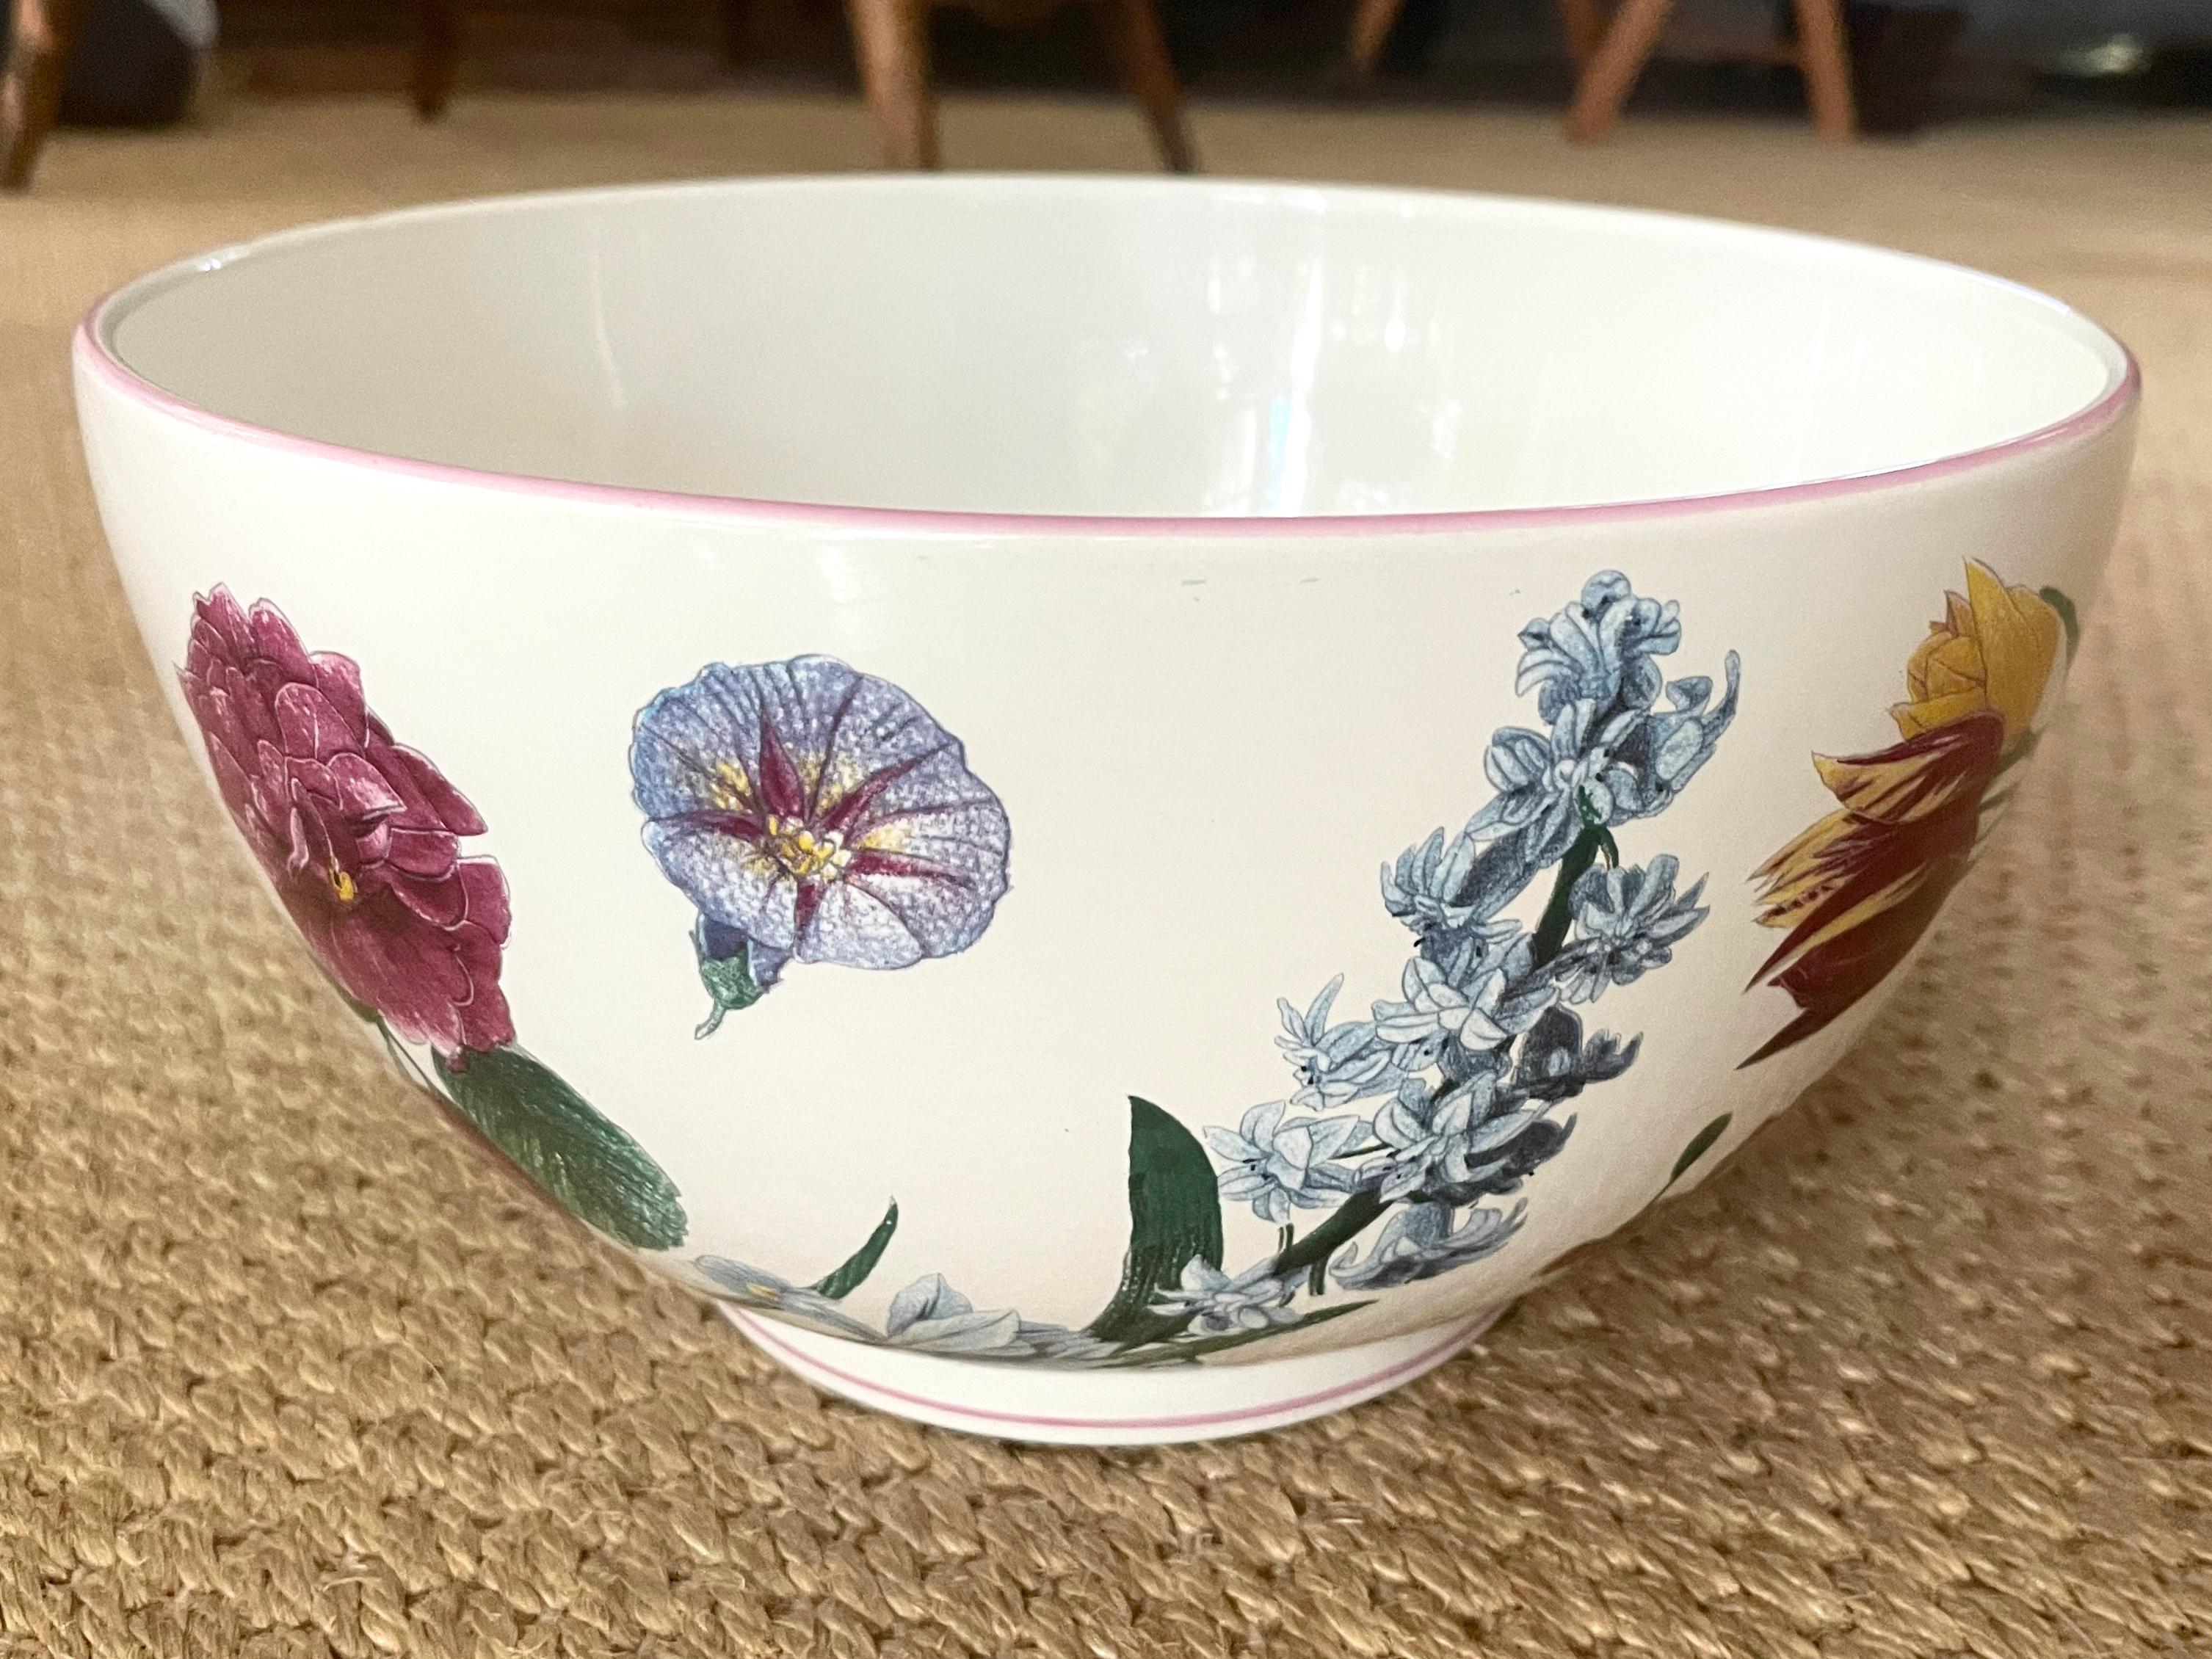 Purple, yellow and blue floral serving bowl. Portuguese floral painted ceramic bowl with beautiful rendition of hydrangeas, tulip and hyacinth etc. in vivid hues. Portugal 20th
Dimensions: 9